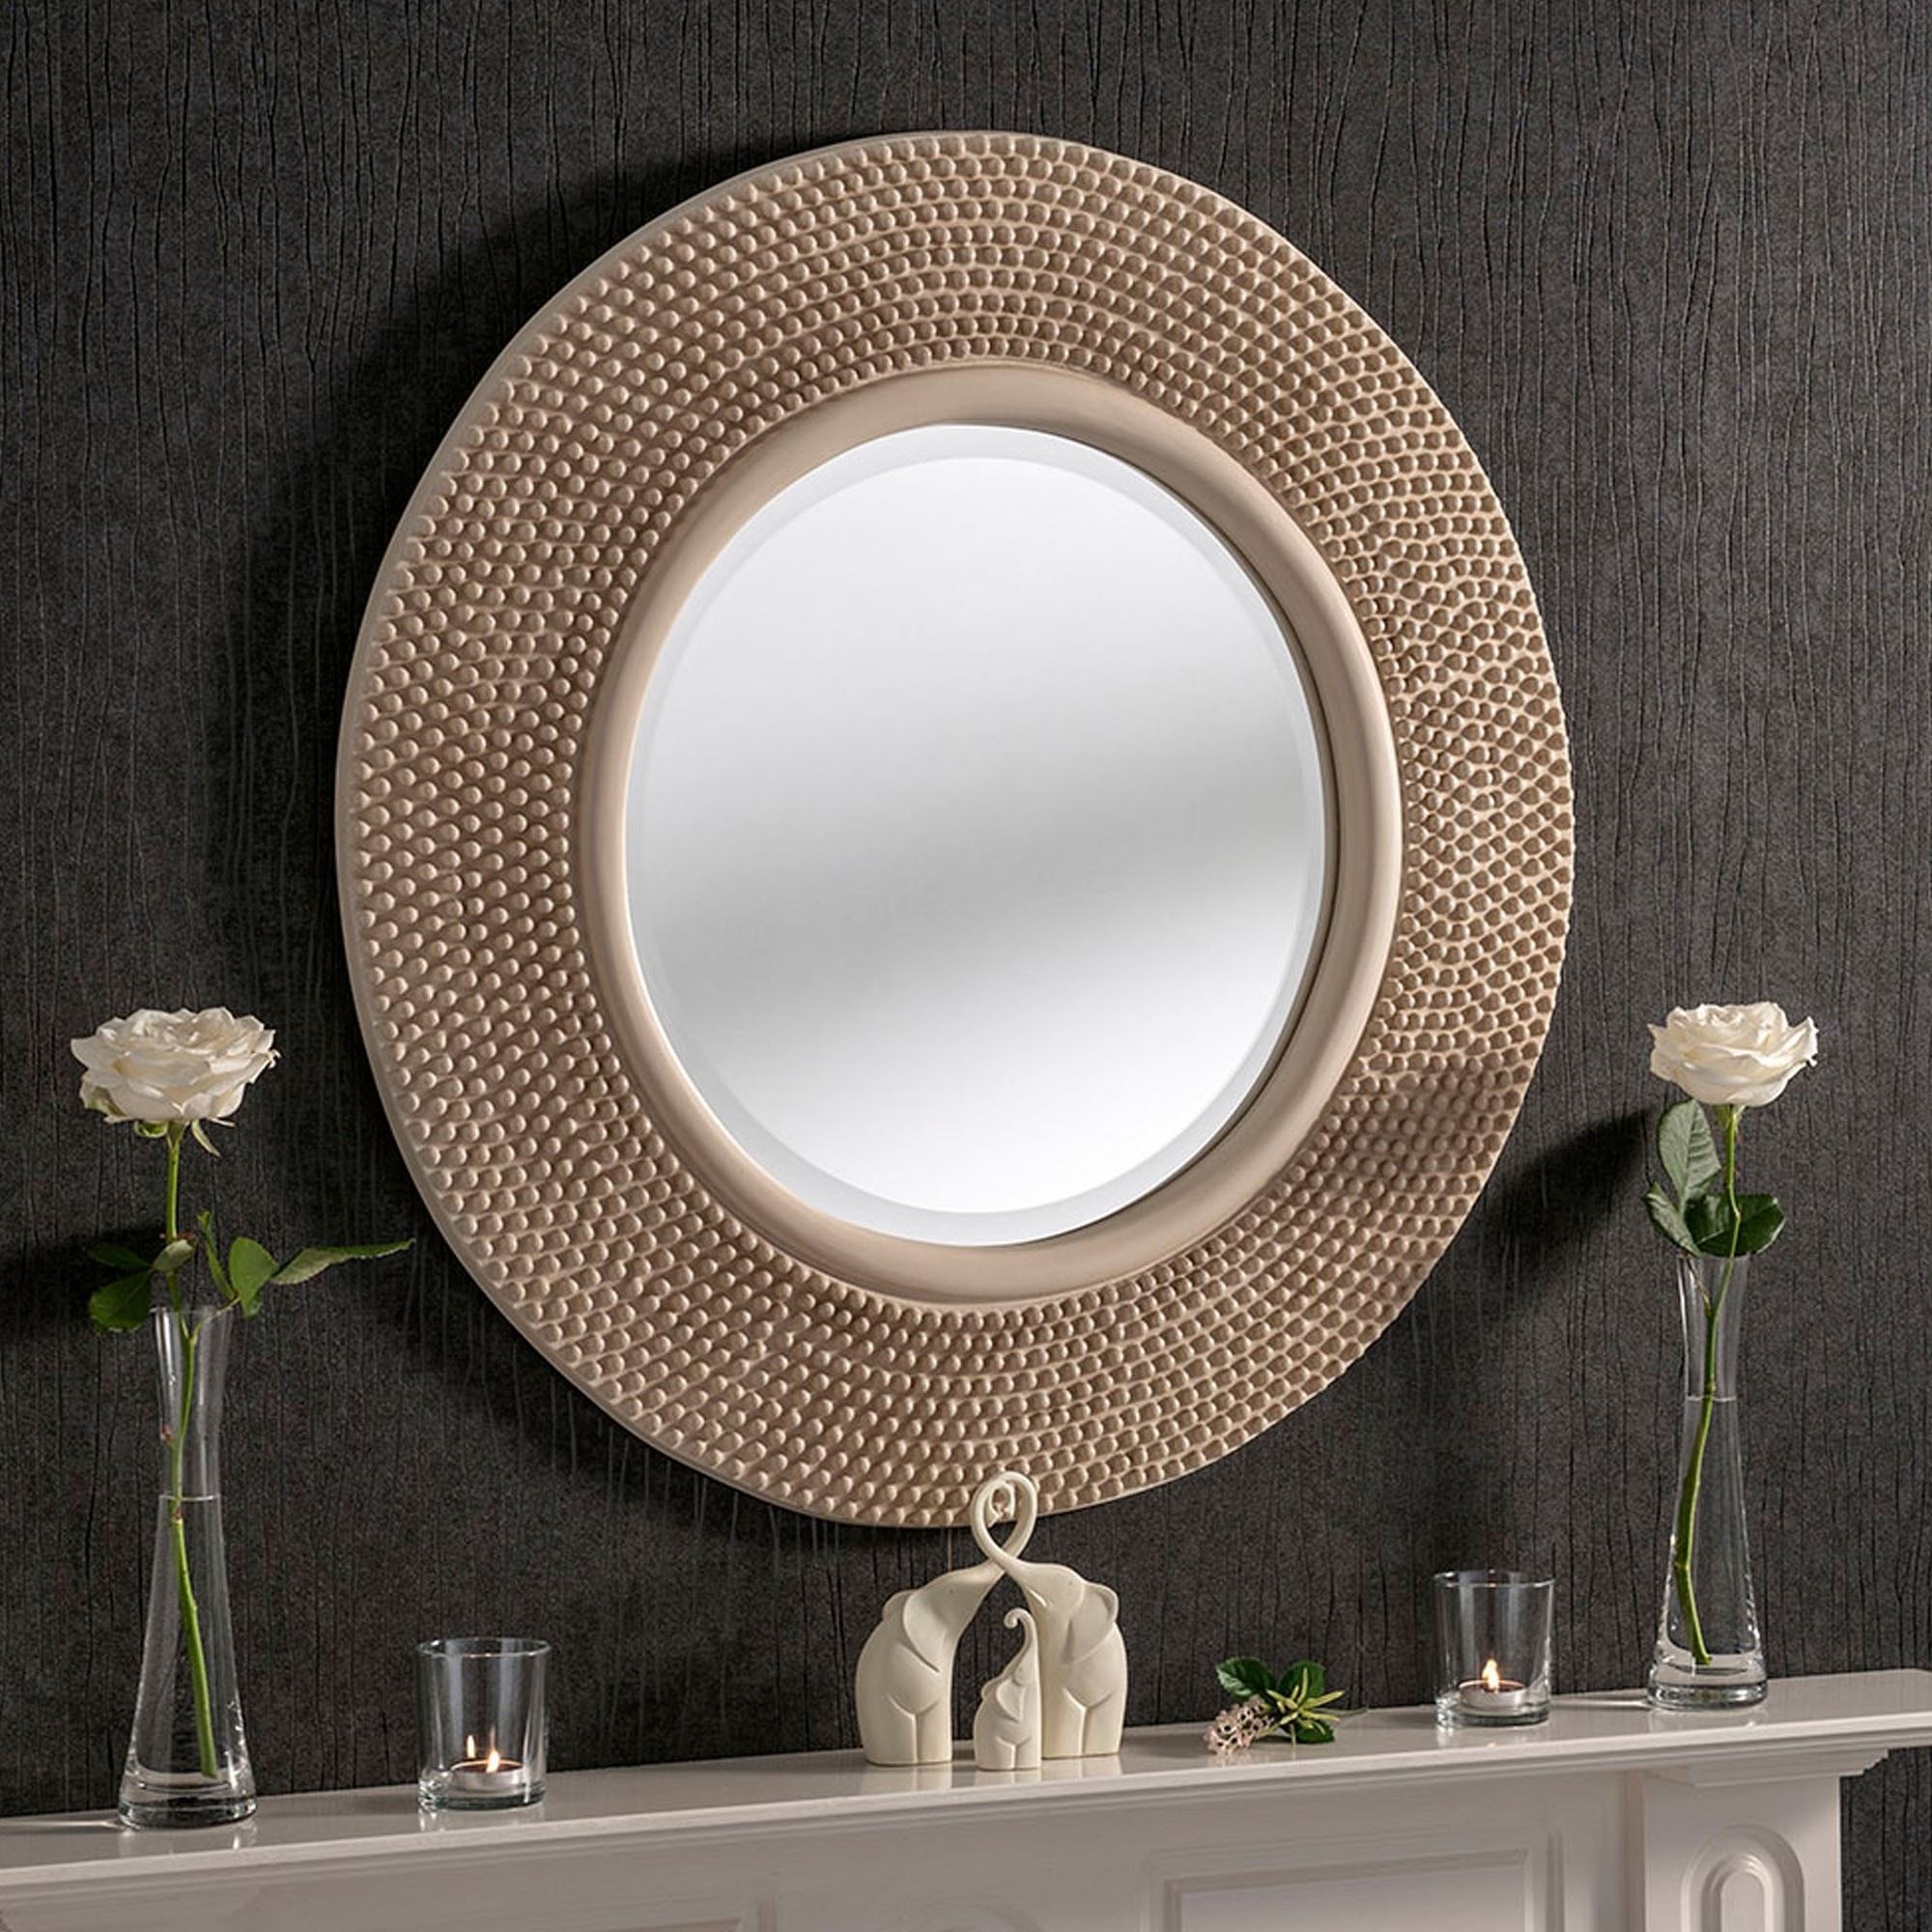 Circular Contemporary Ivory Studded Wall Mirror | Wall Mirrors Inside Round Grid Wall Mirrors (View 1 of 15)